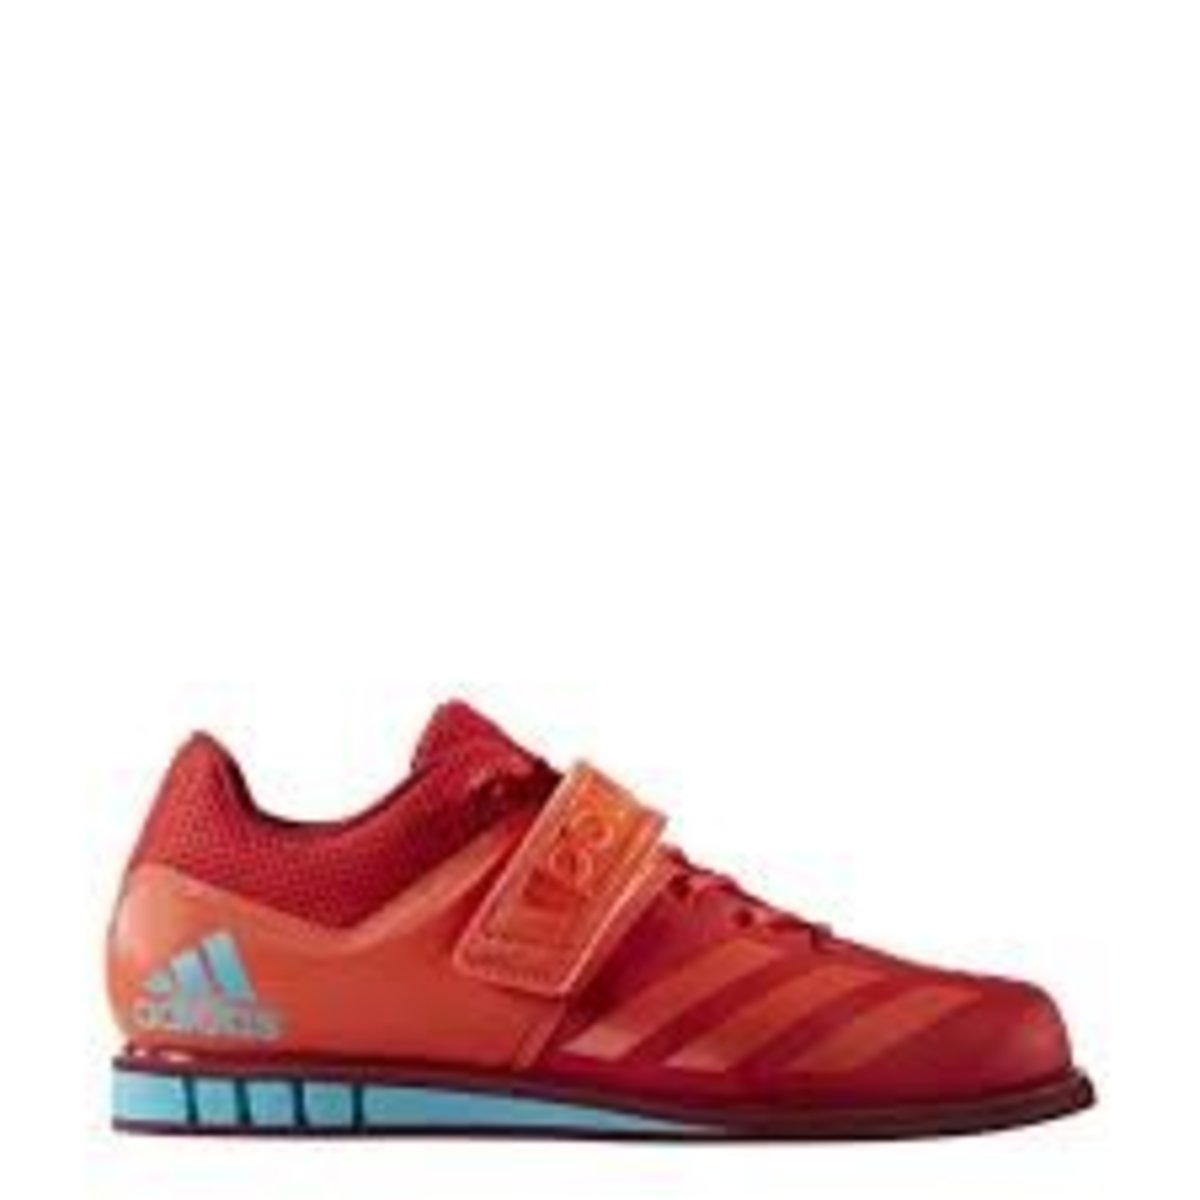 adidas powerlift 3.1 weightlifting shoes